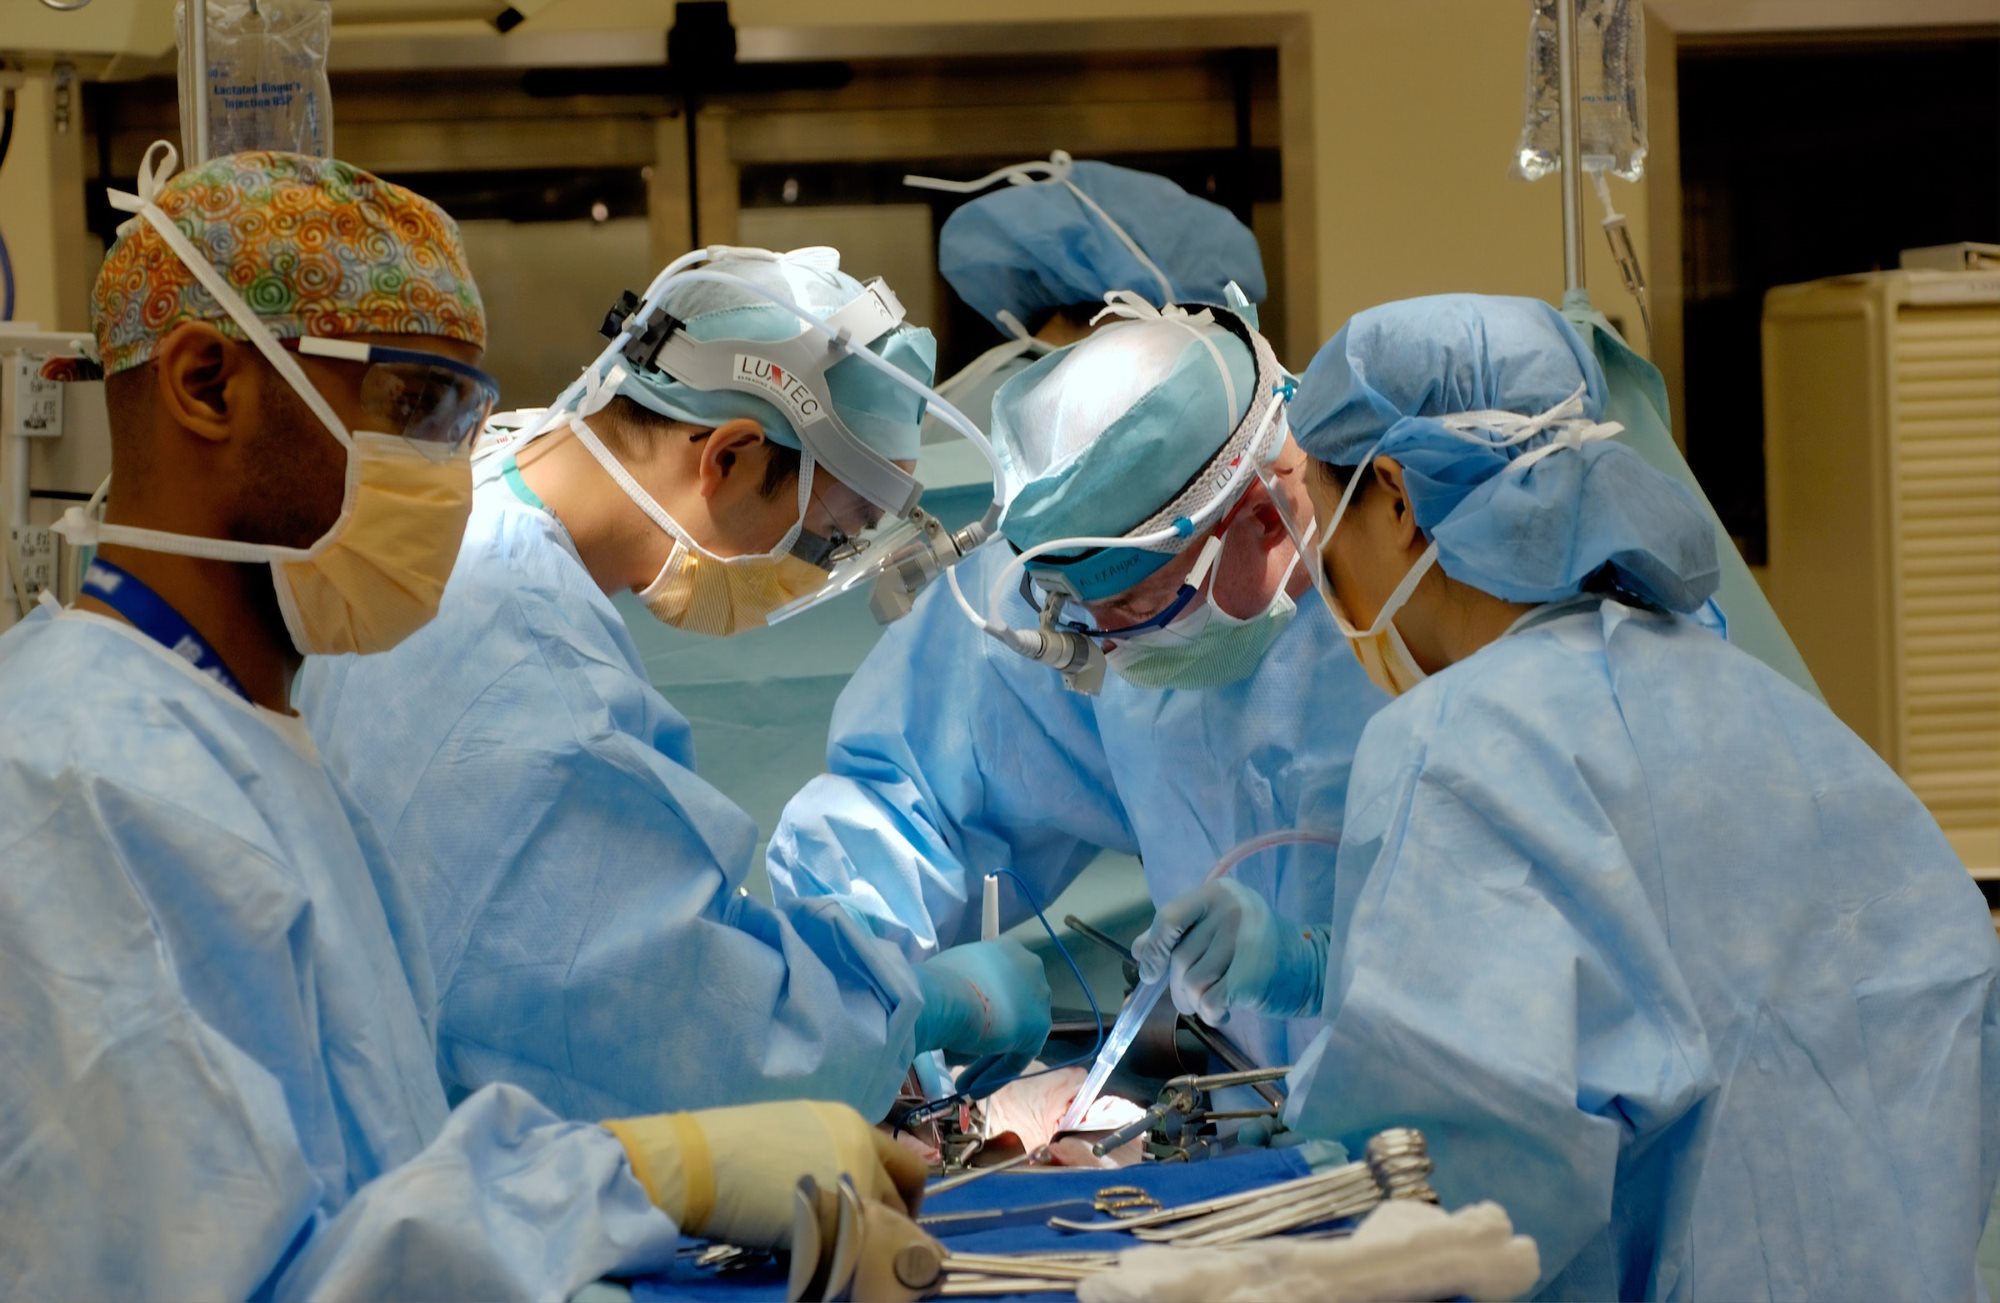 Surgeons and nurses in operating room